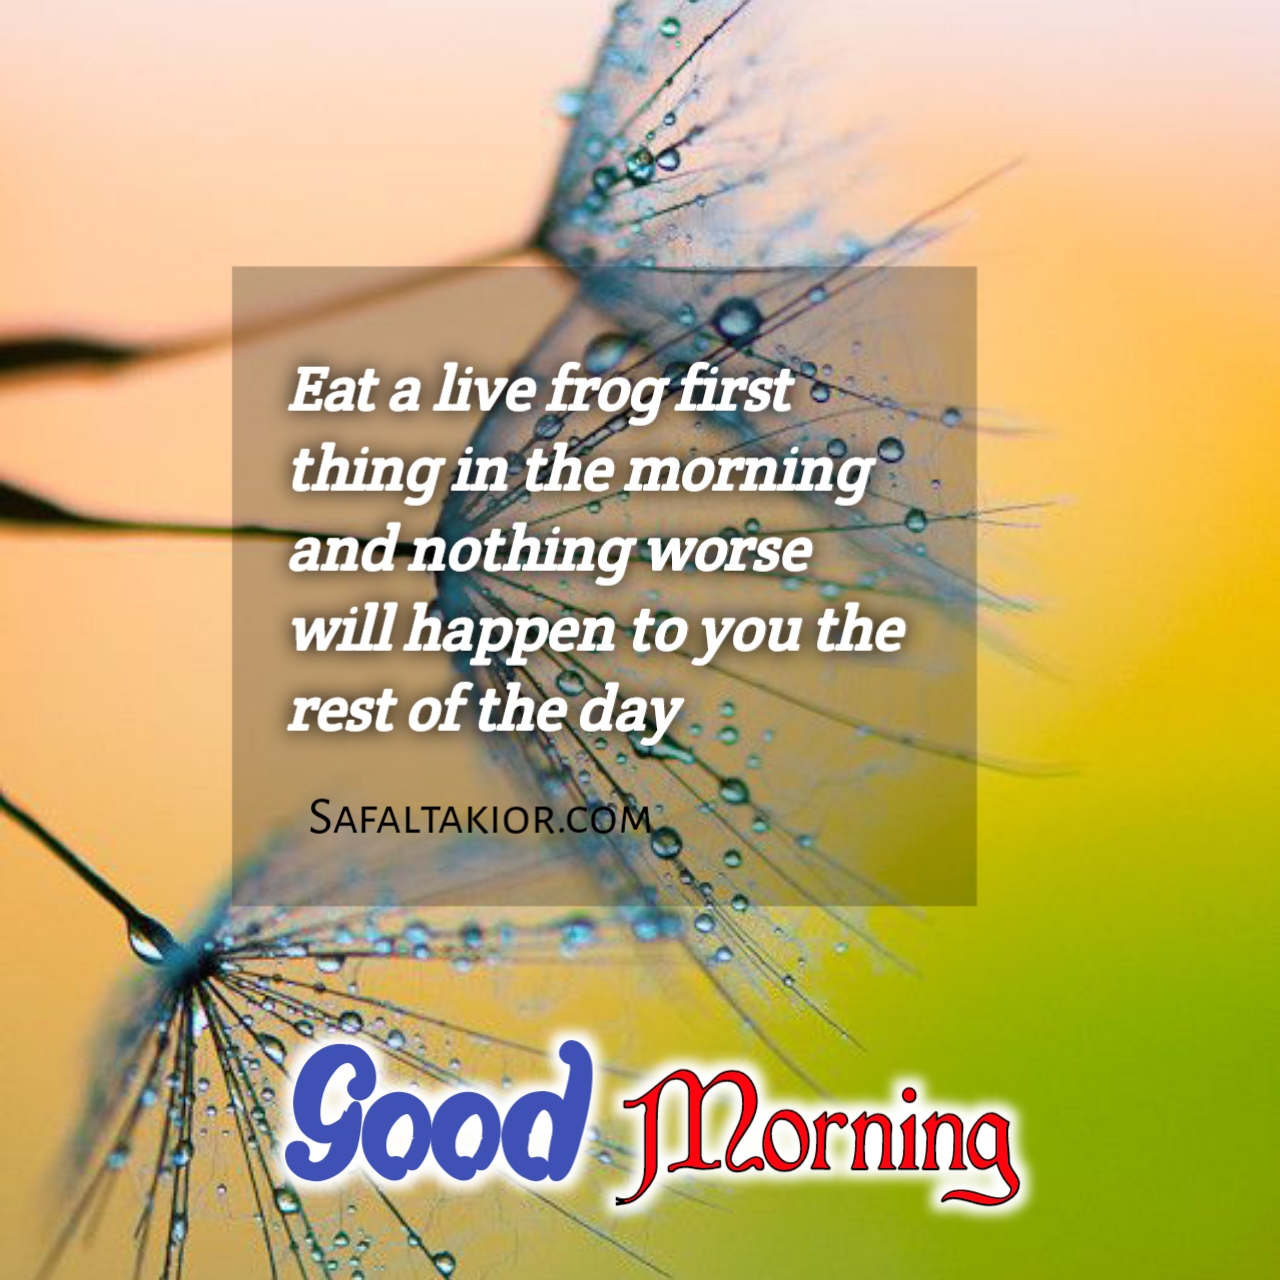 Beautiful 'Good Morning' Thoughts,Quotes &images Messages